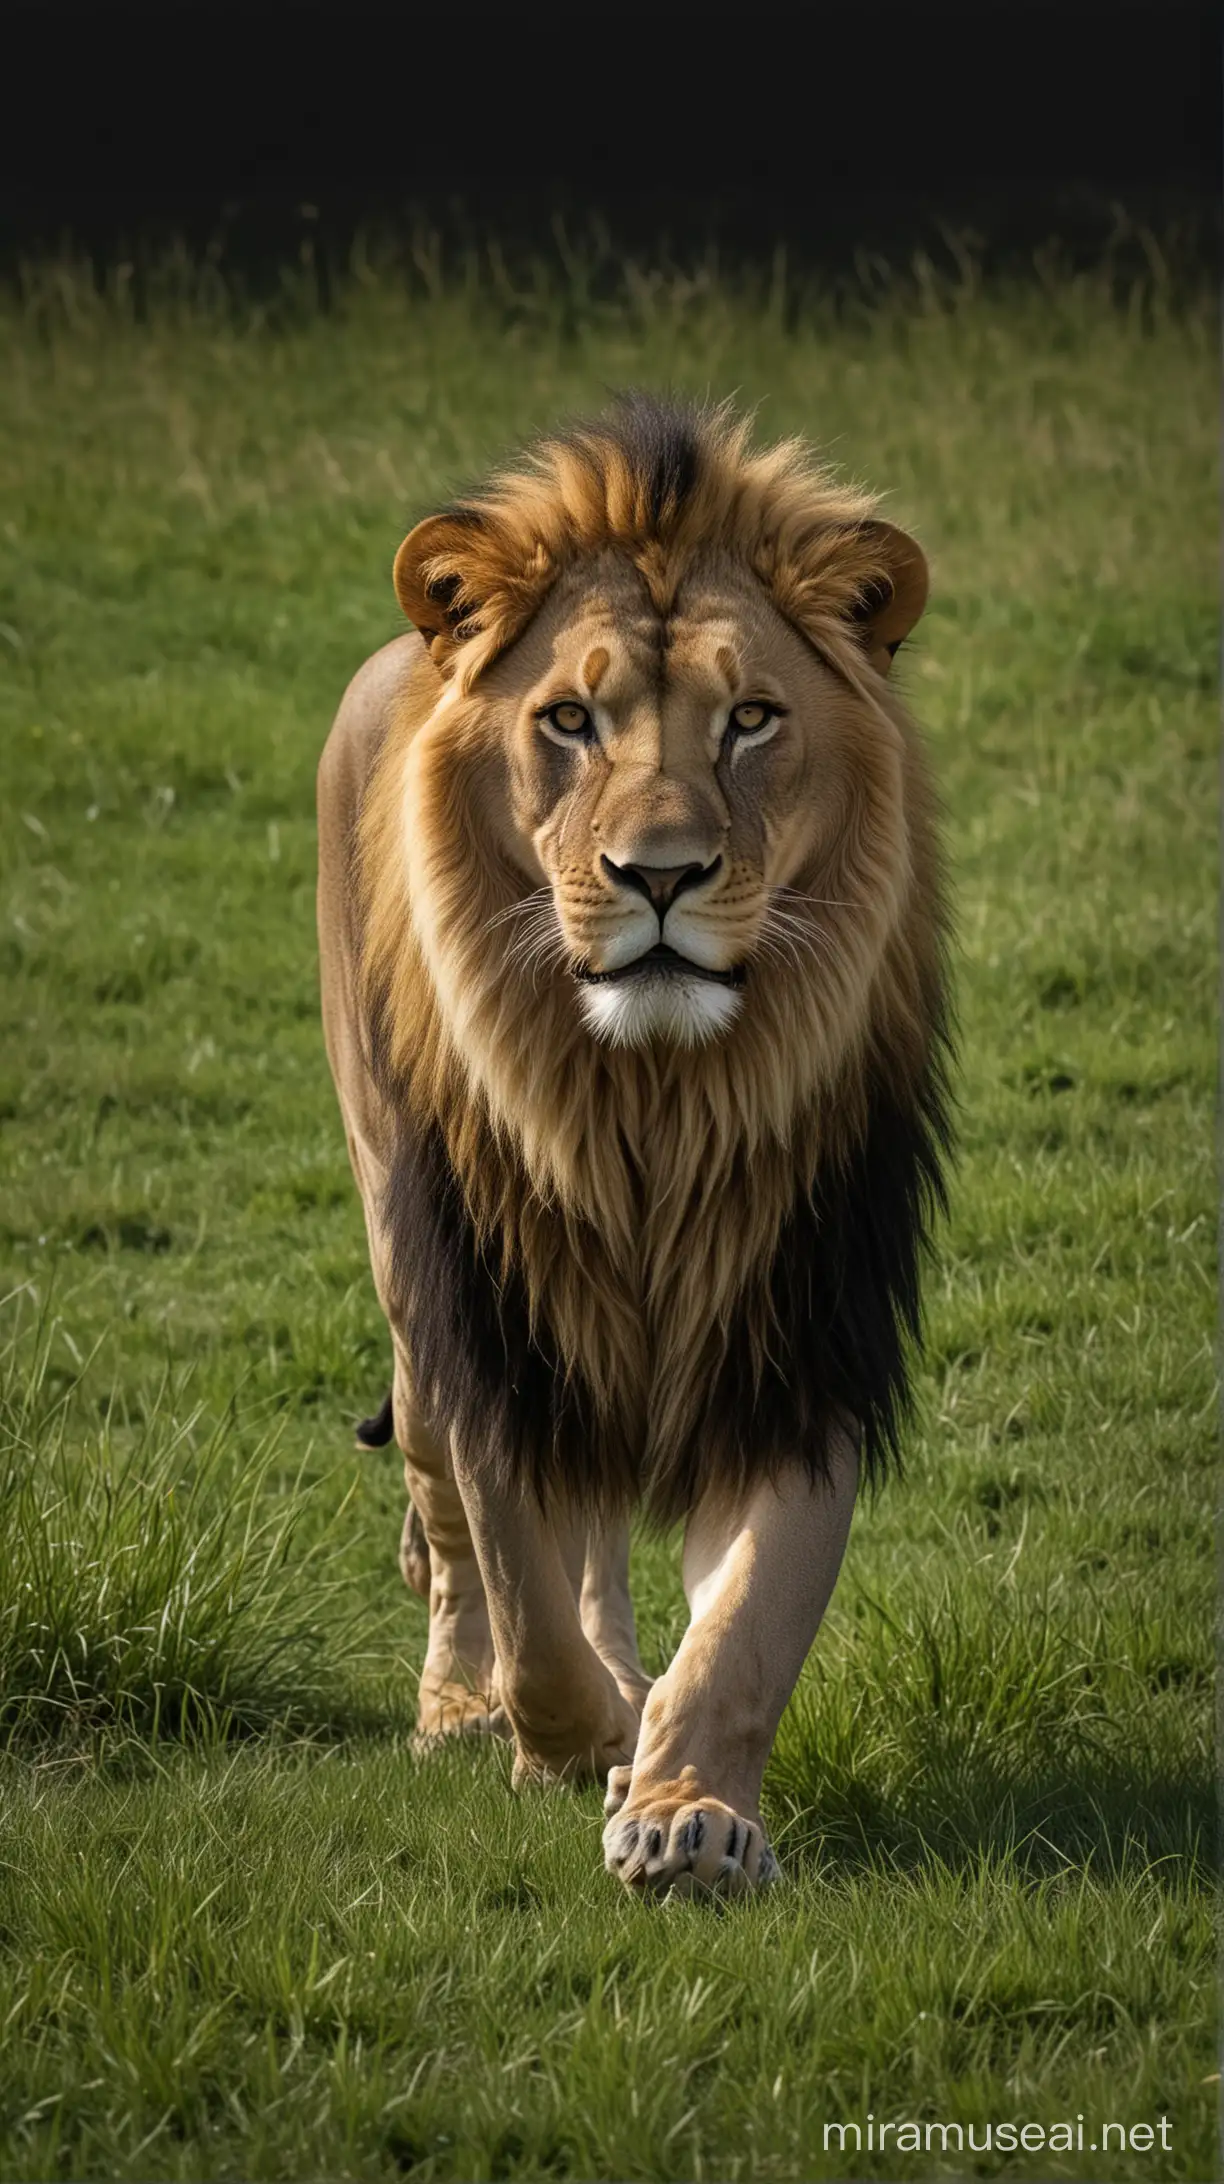  lion walking in grass with a black background